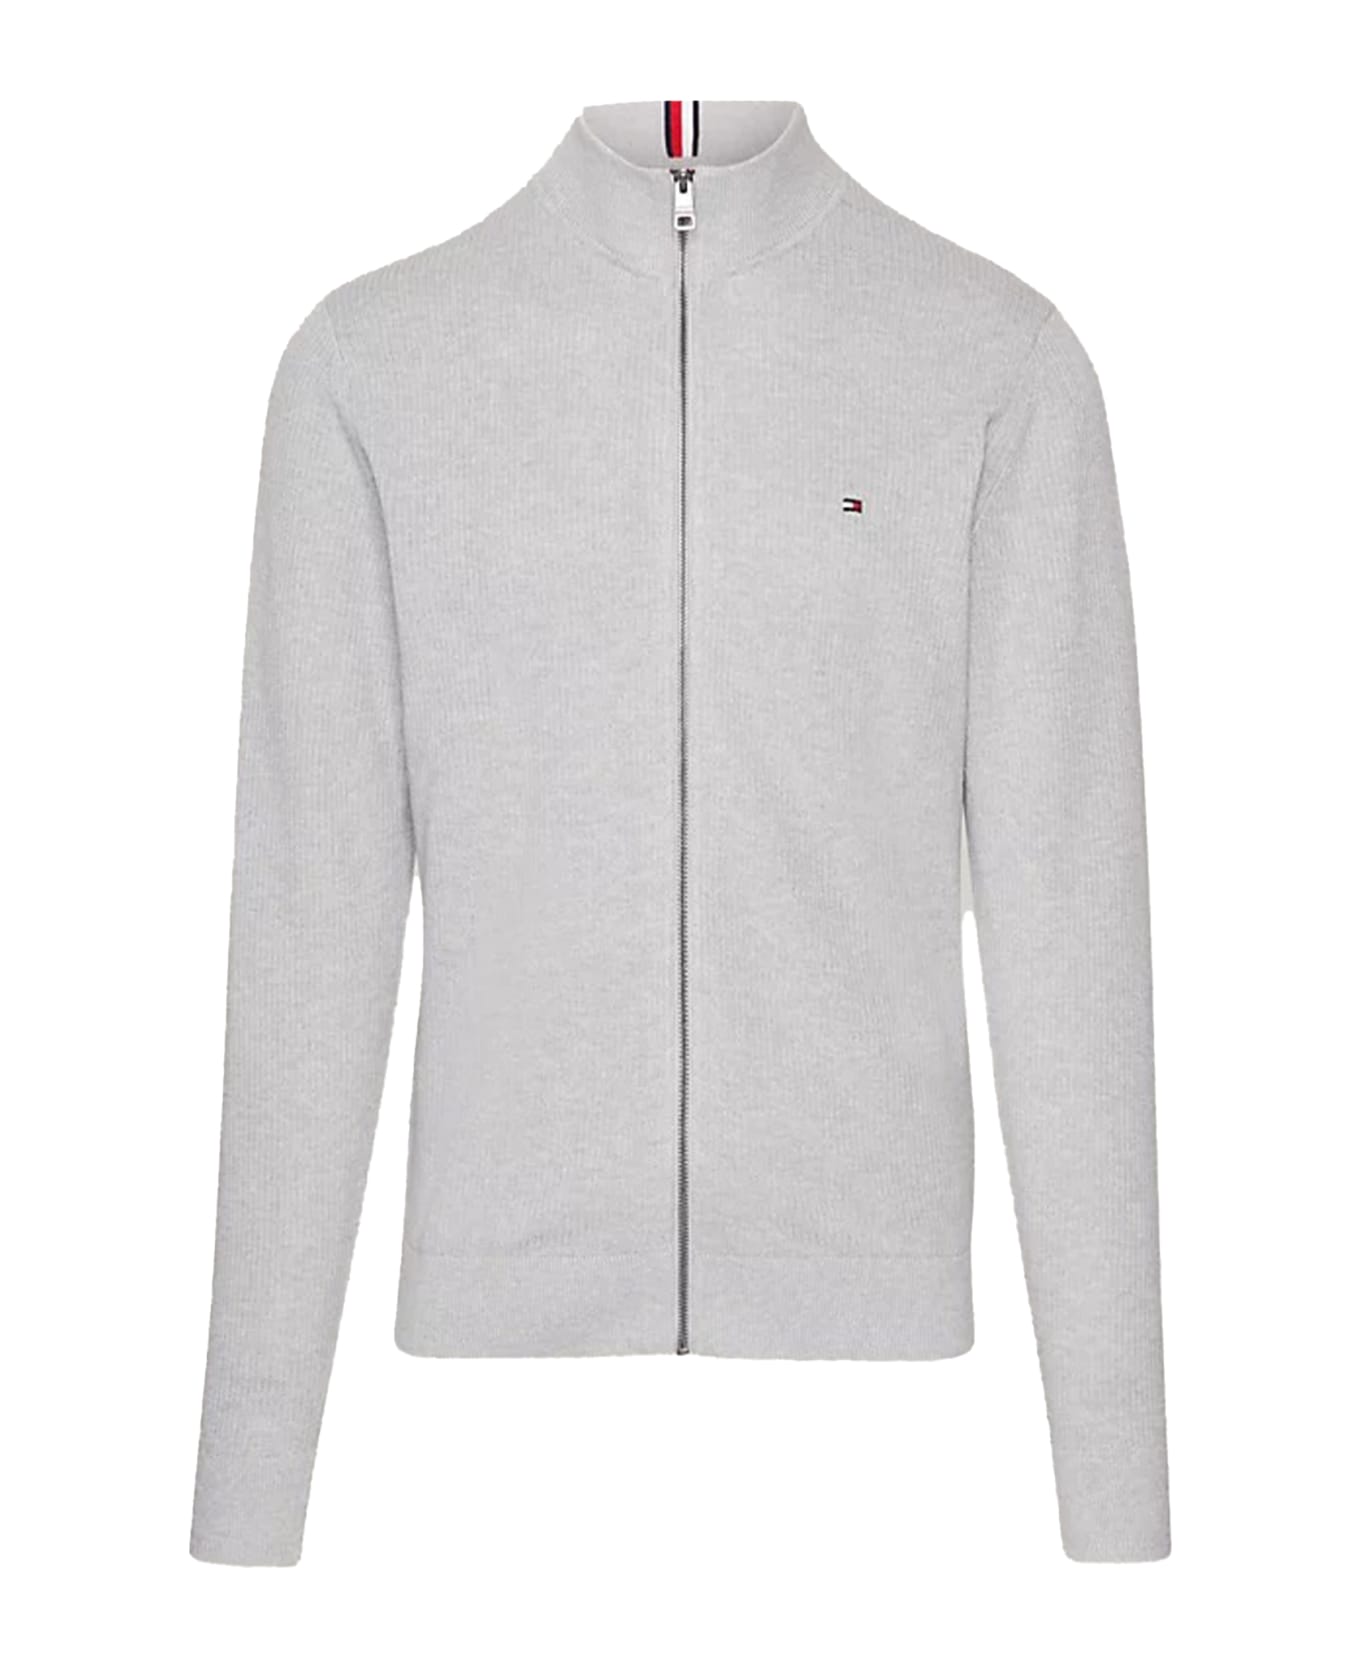 Tommy Hilfiger Textured Cardigan With Full Zip - LIGHT GREY HEATHER